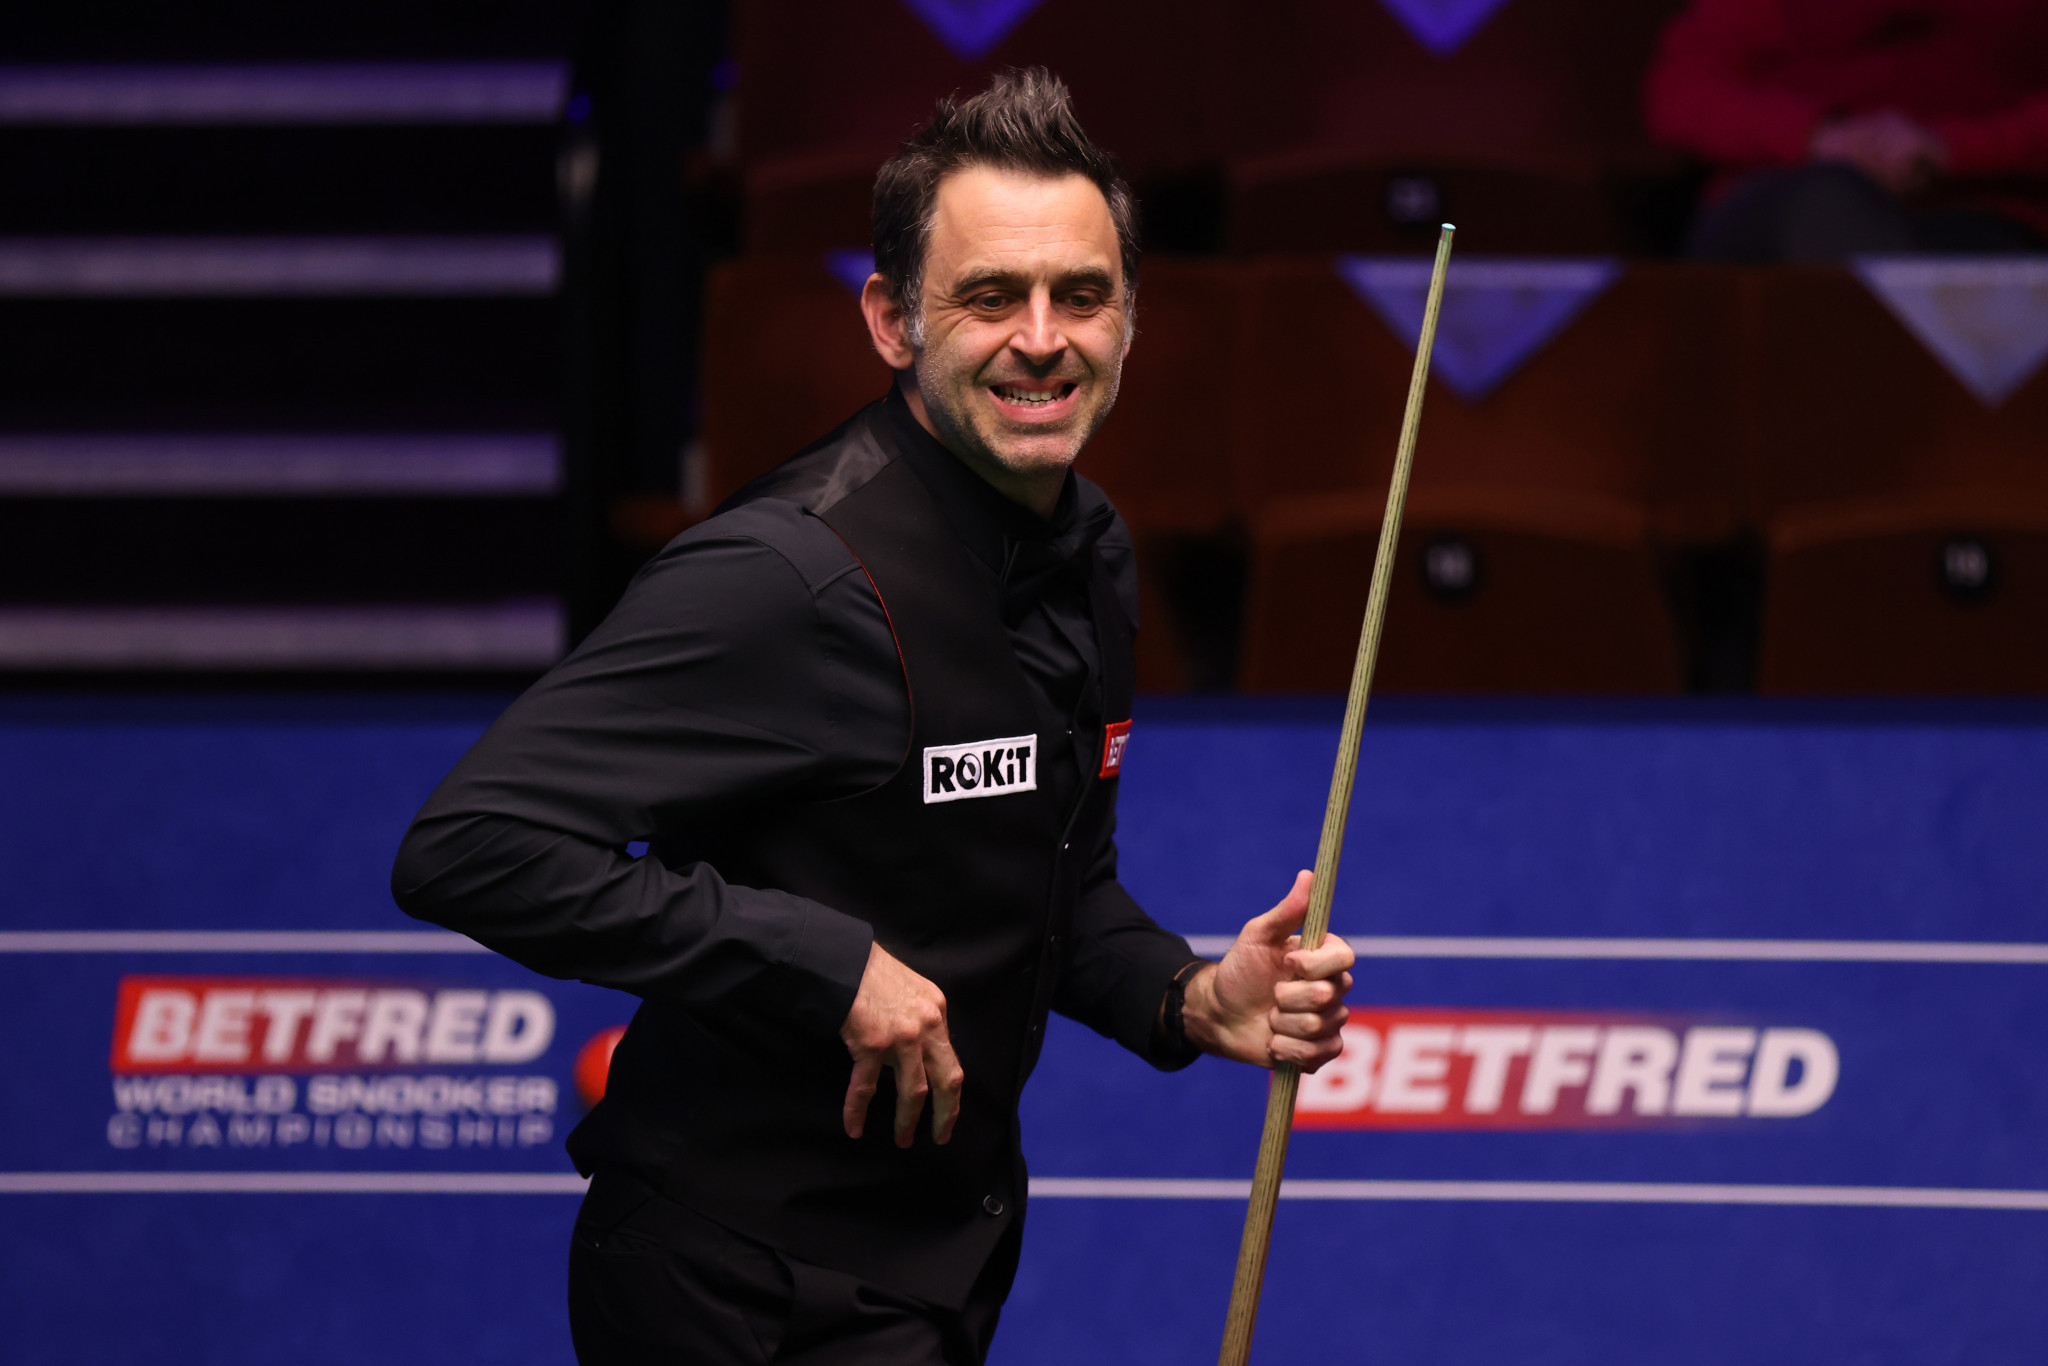 World number one Ronnie O'Sullivan of England won the World Snooker Championship for the sixth time in 2020 ©Getty Images